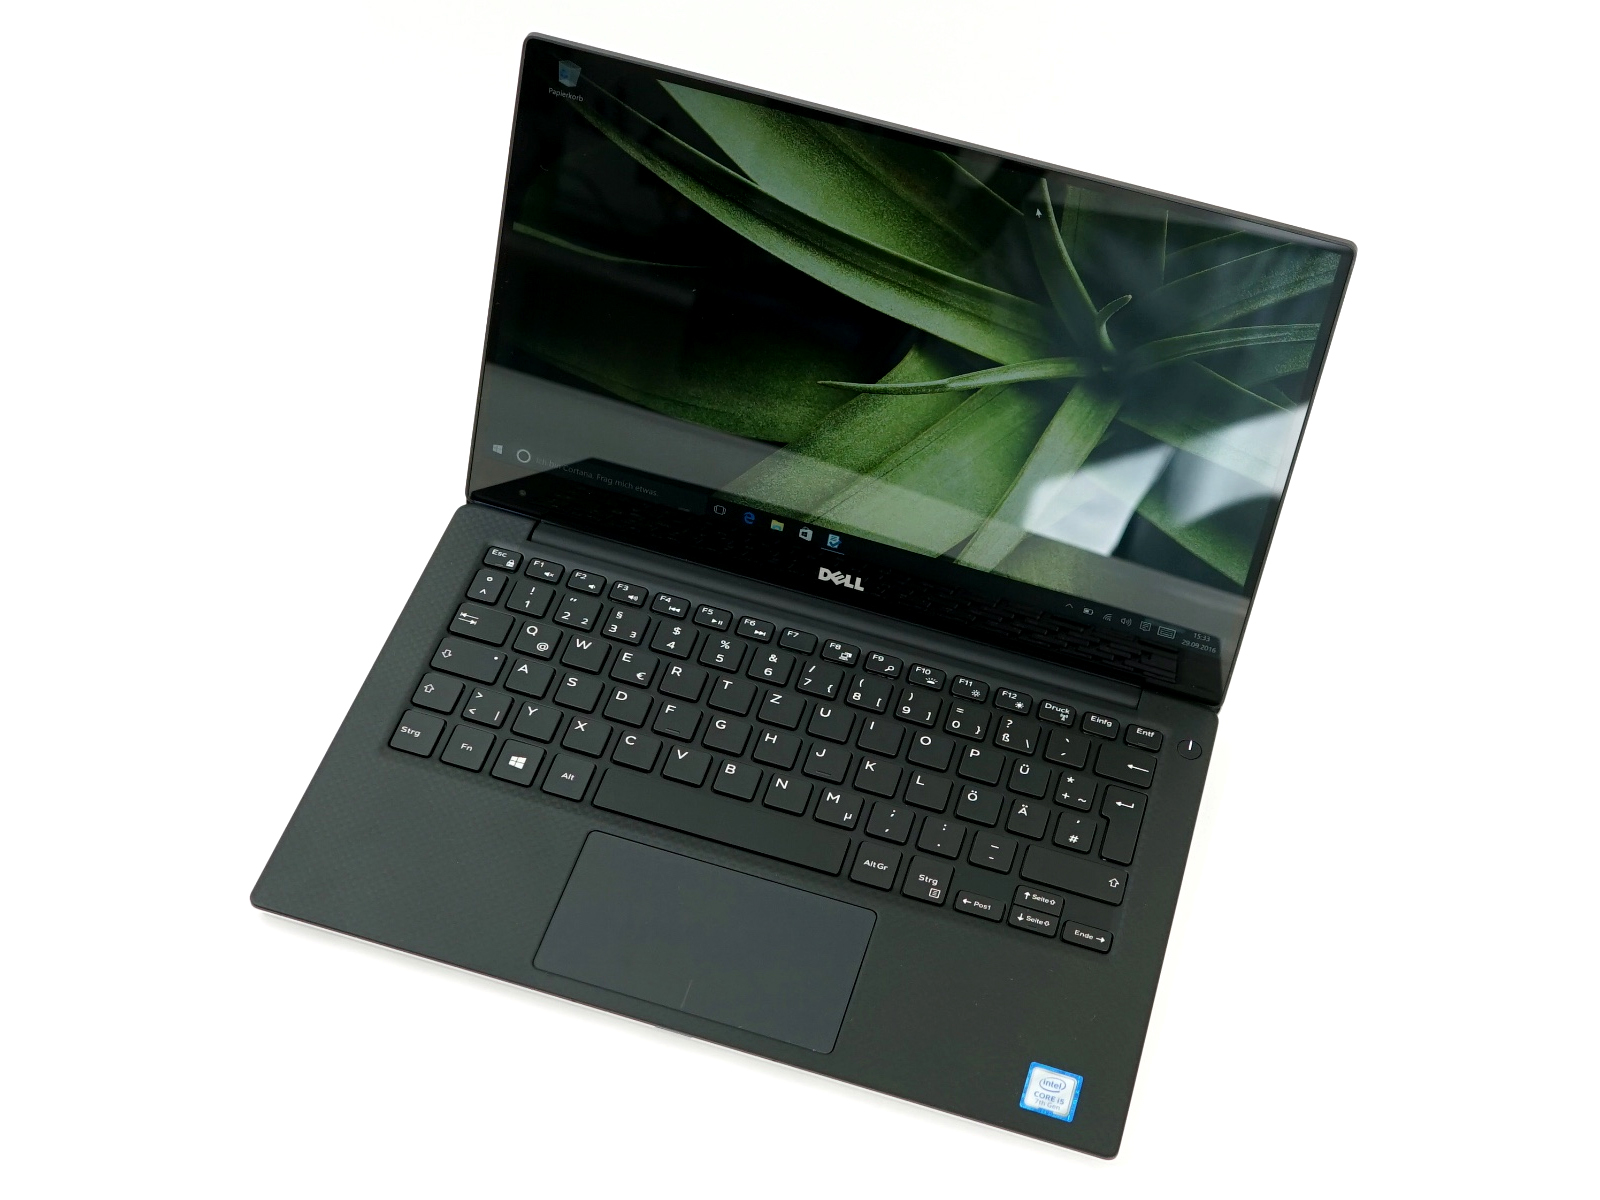 Dell XPS 13 9360R (i5-8250U, QHD) Laptop Review - NotebookCheck